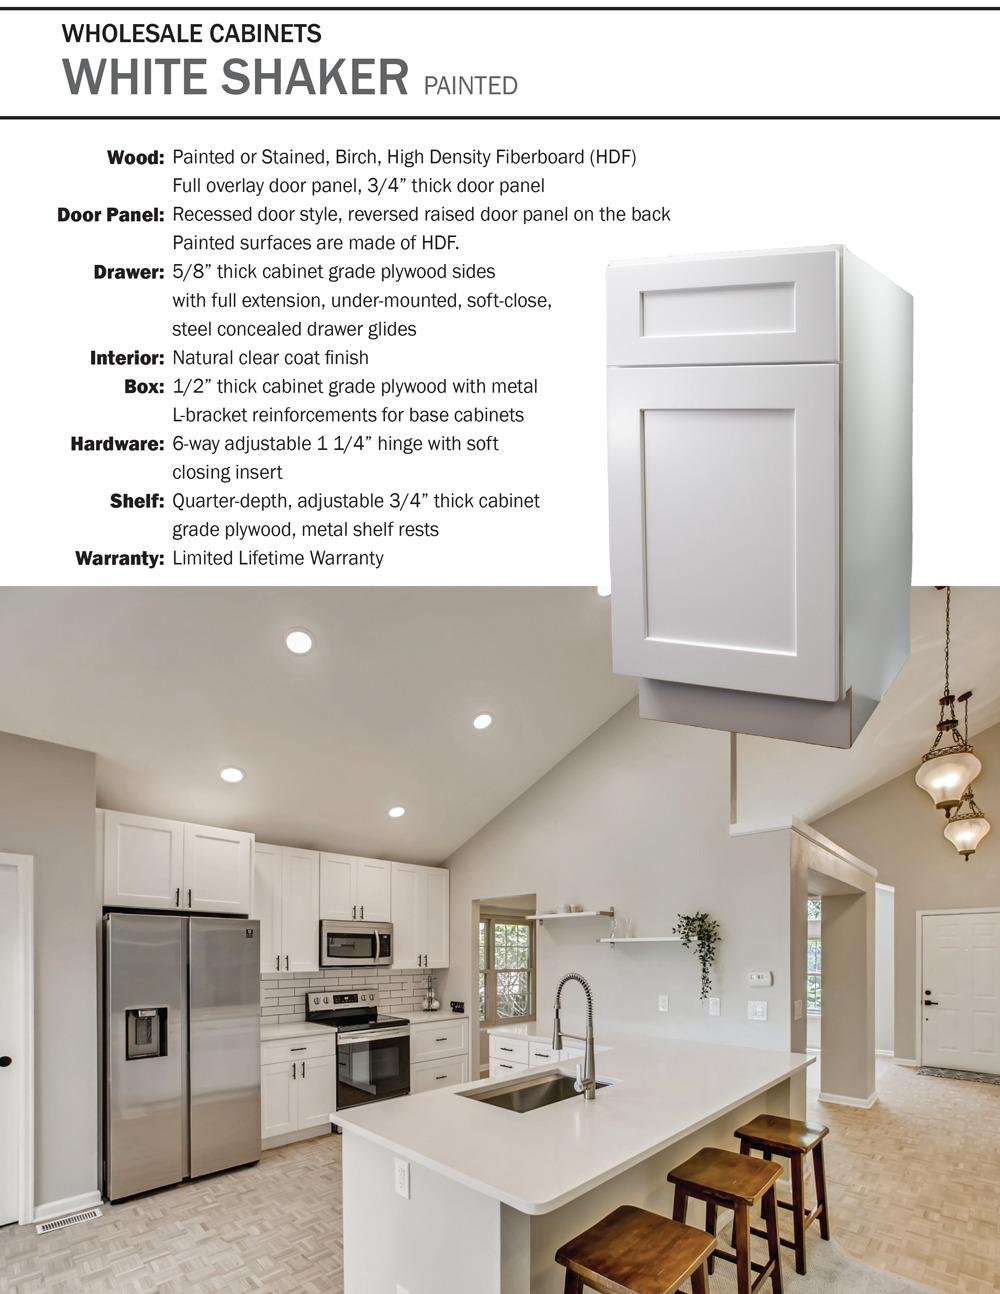 White Shaker Cabinet Catalog Page